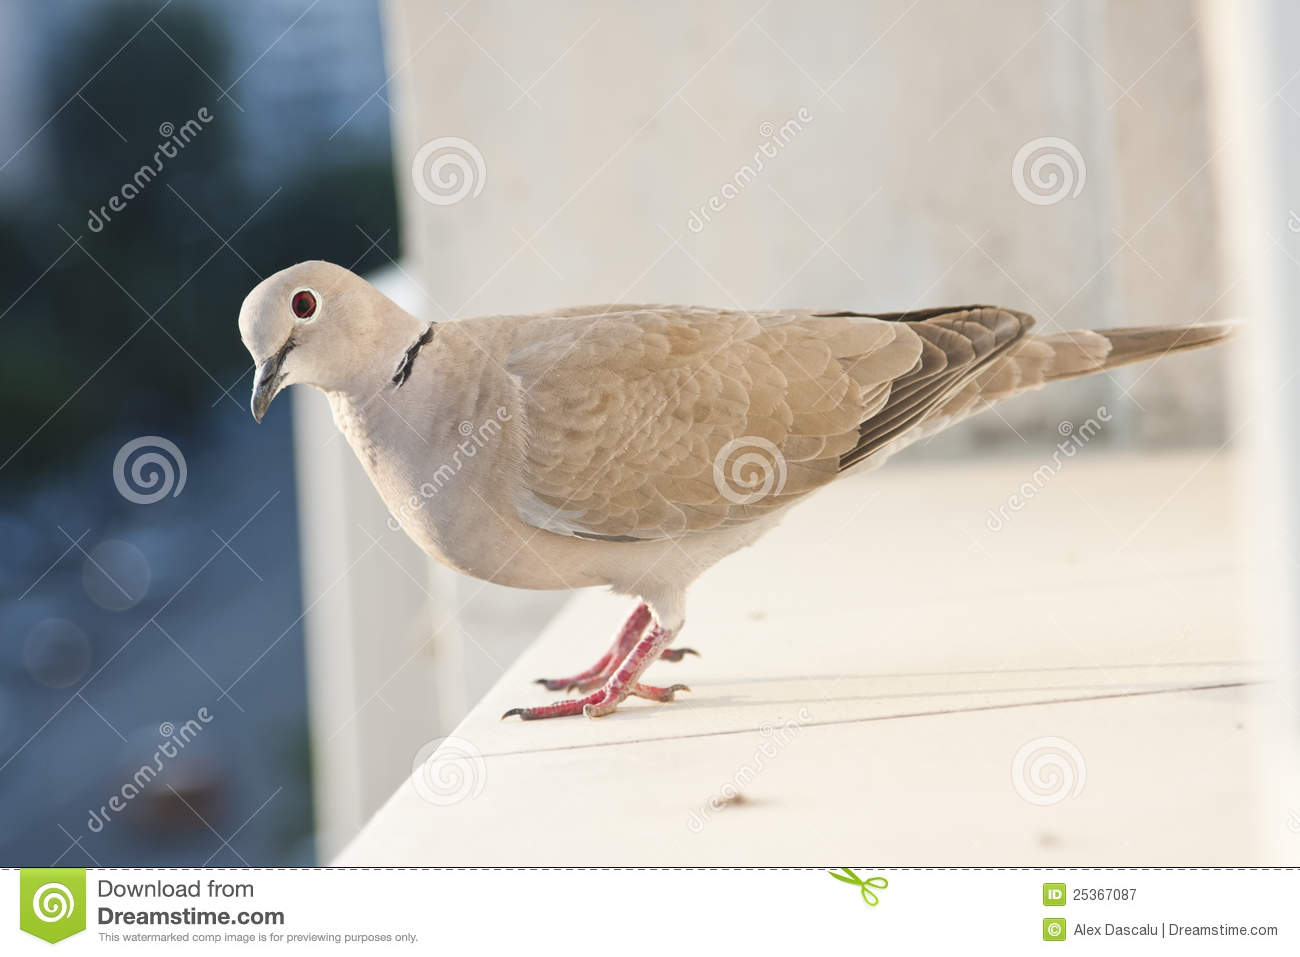 Pigeon On A Ledge Royalty Free Stock Photography   Image  25367087